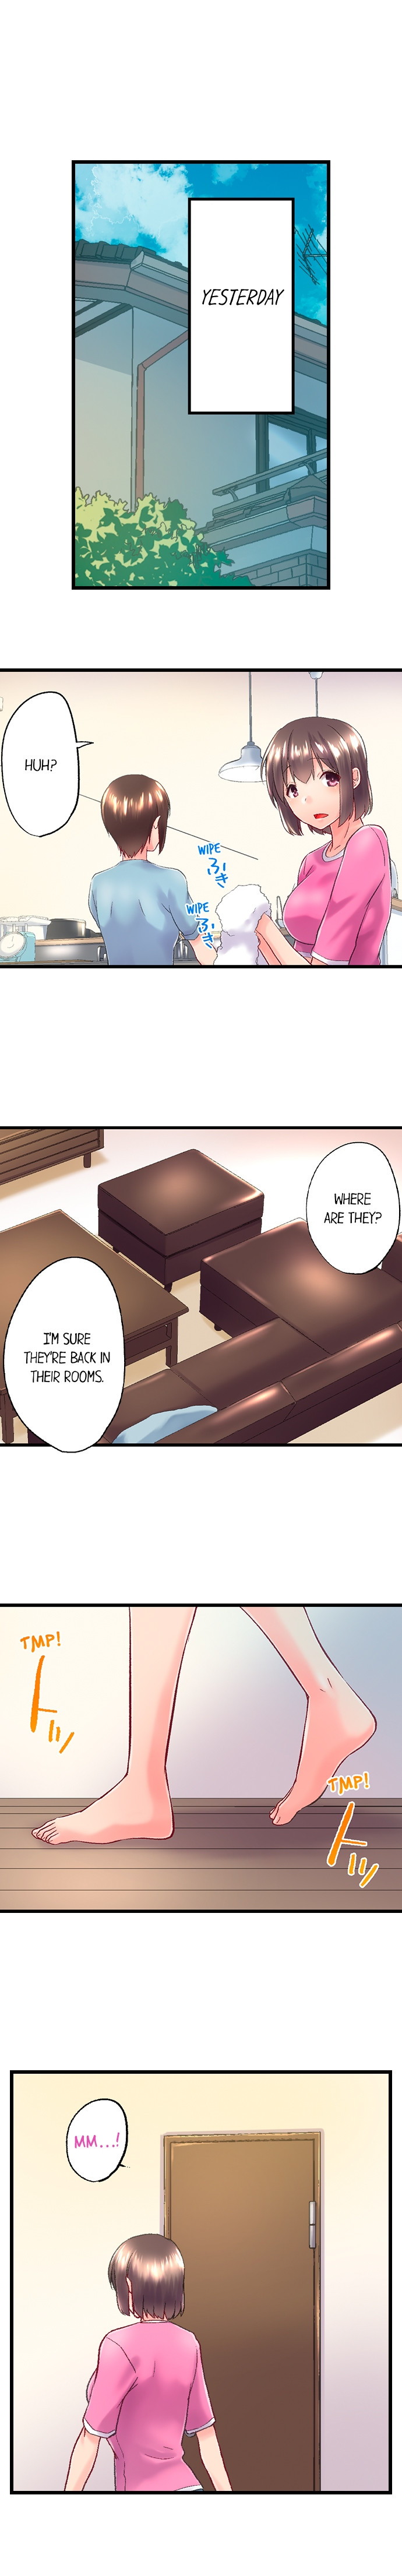 My Brother’s Slipped Inside Me in The Bathtub - Chapter 109 Page 7